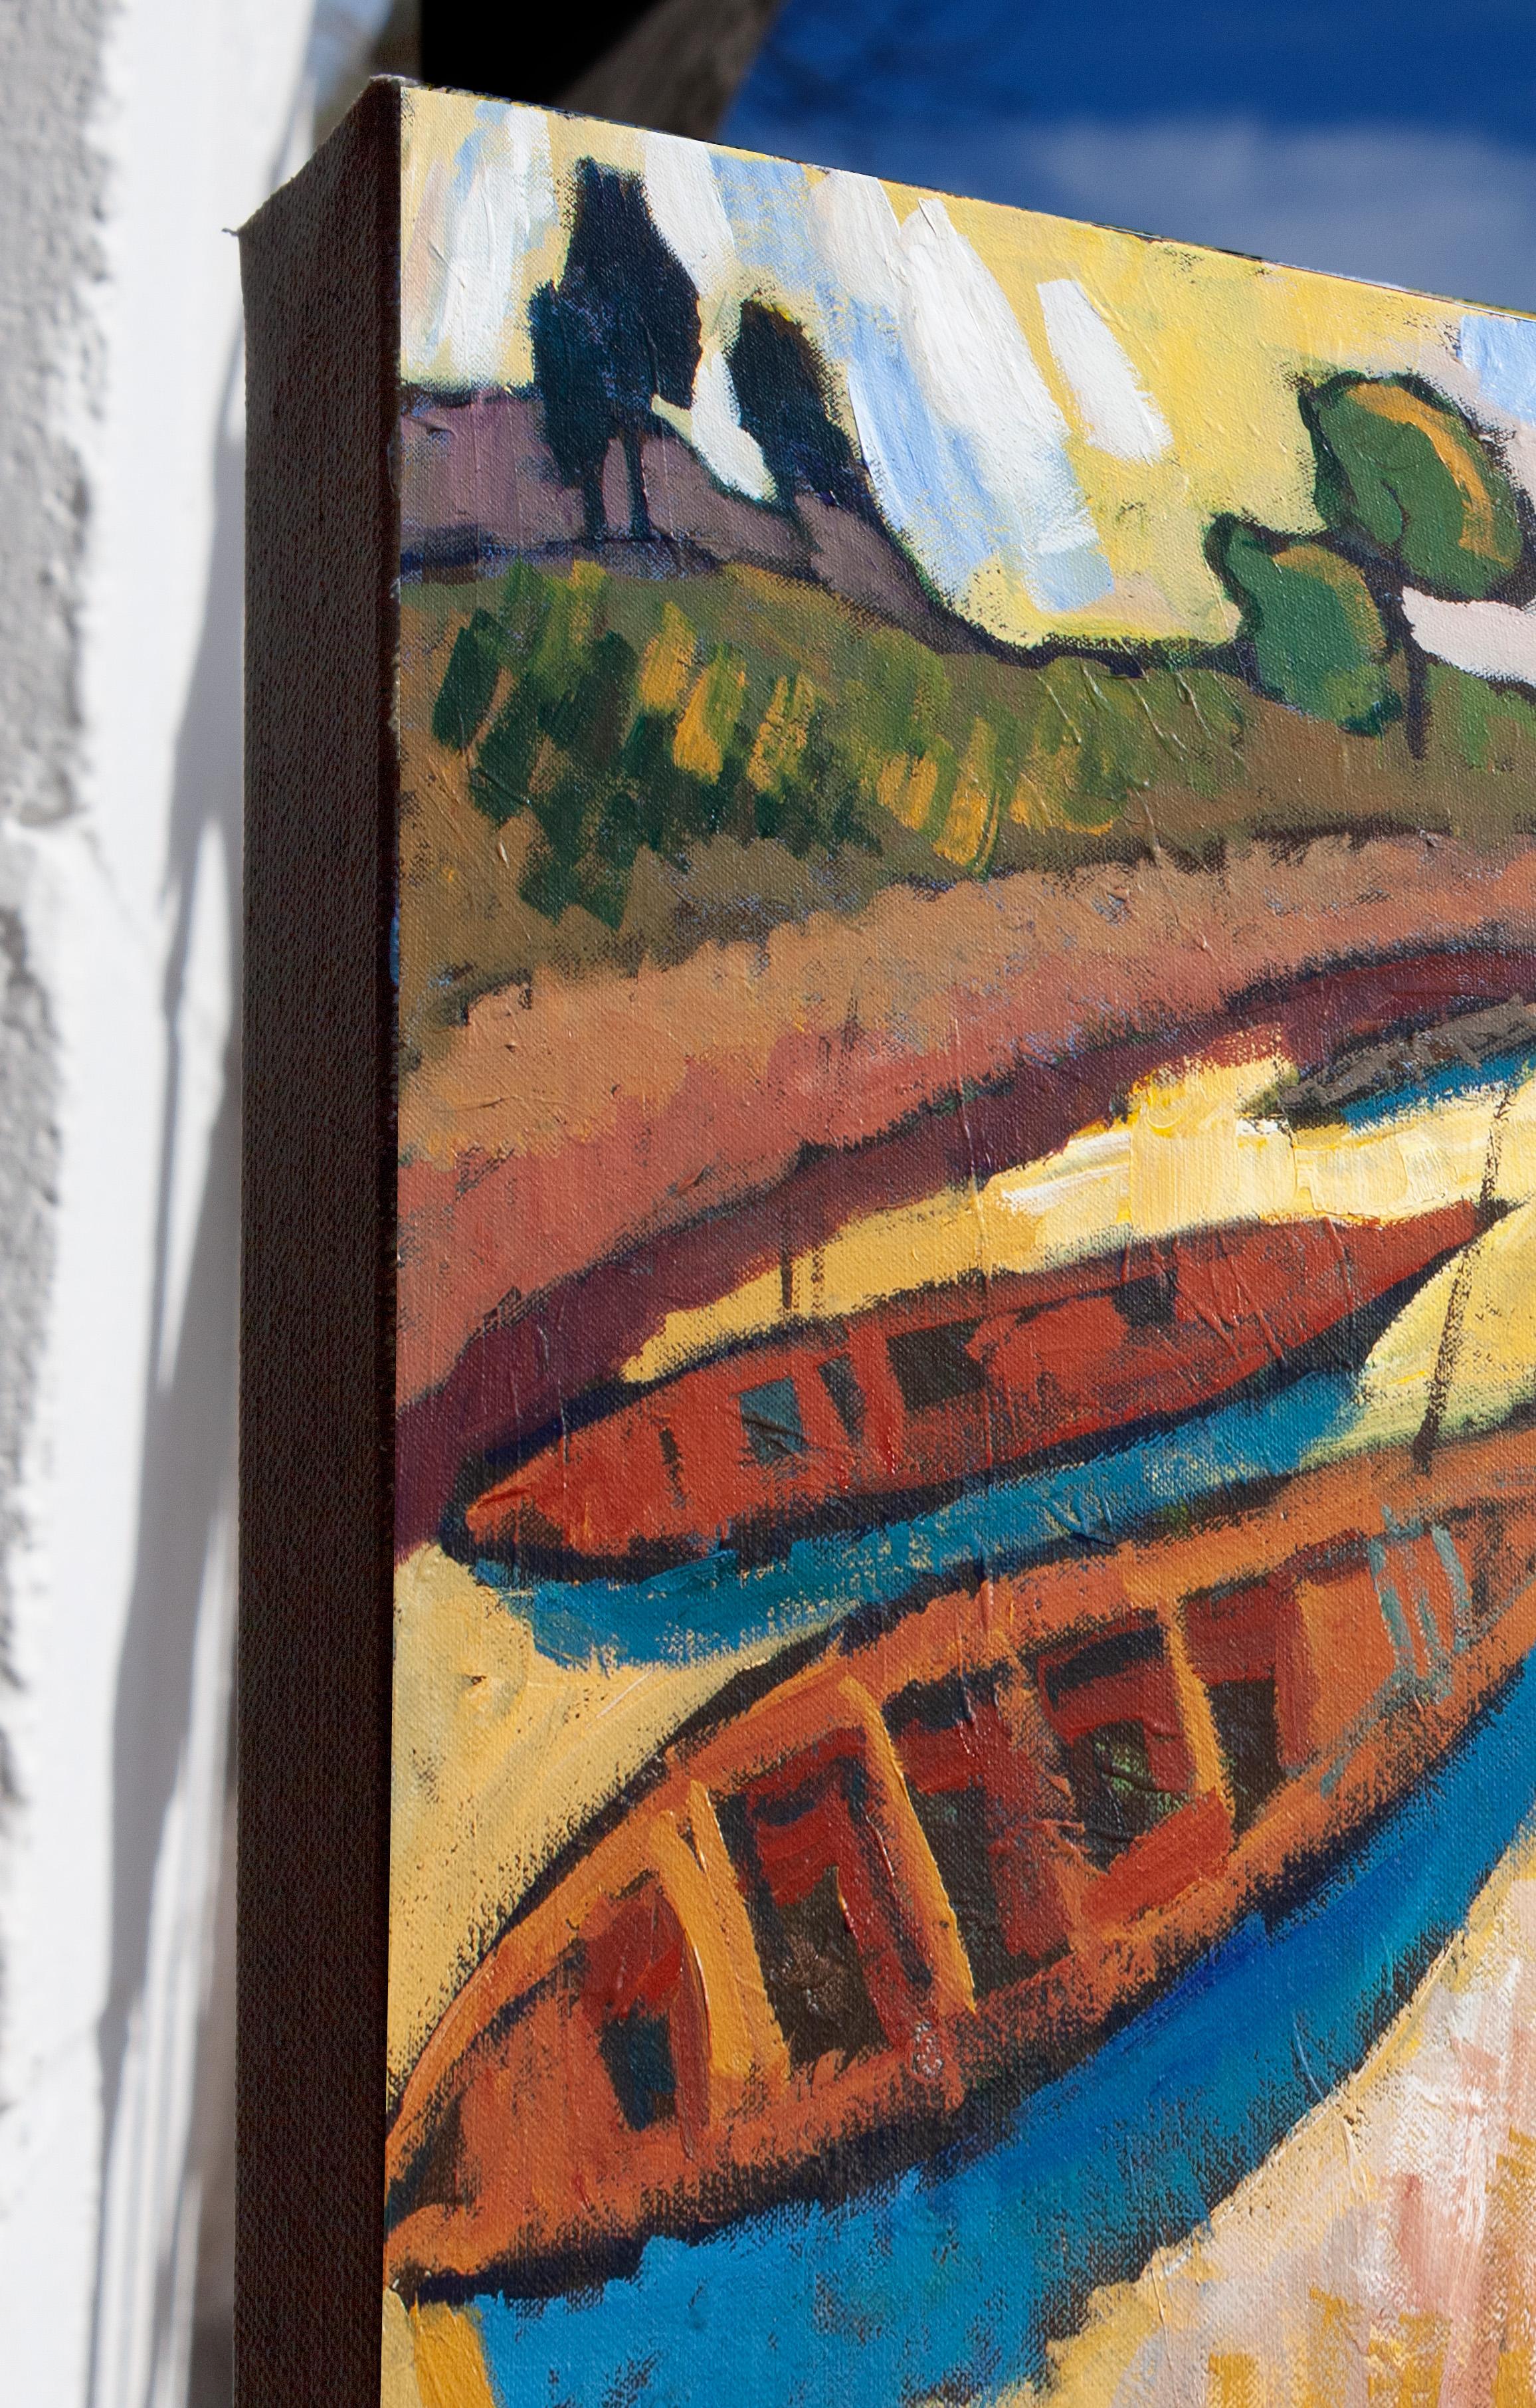 Traditional Boats, Original Painting - Abstract Expressionist Art by Robert Hofherr